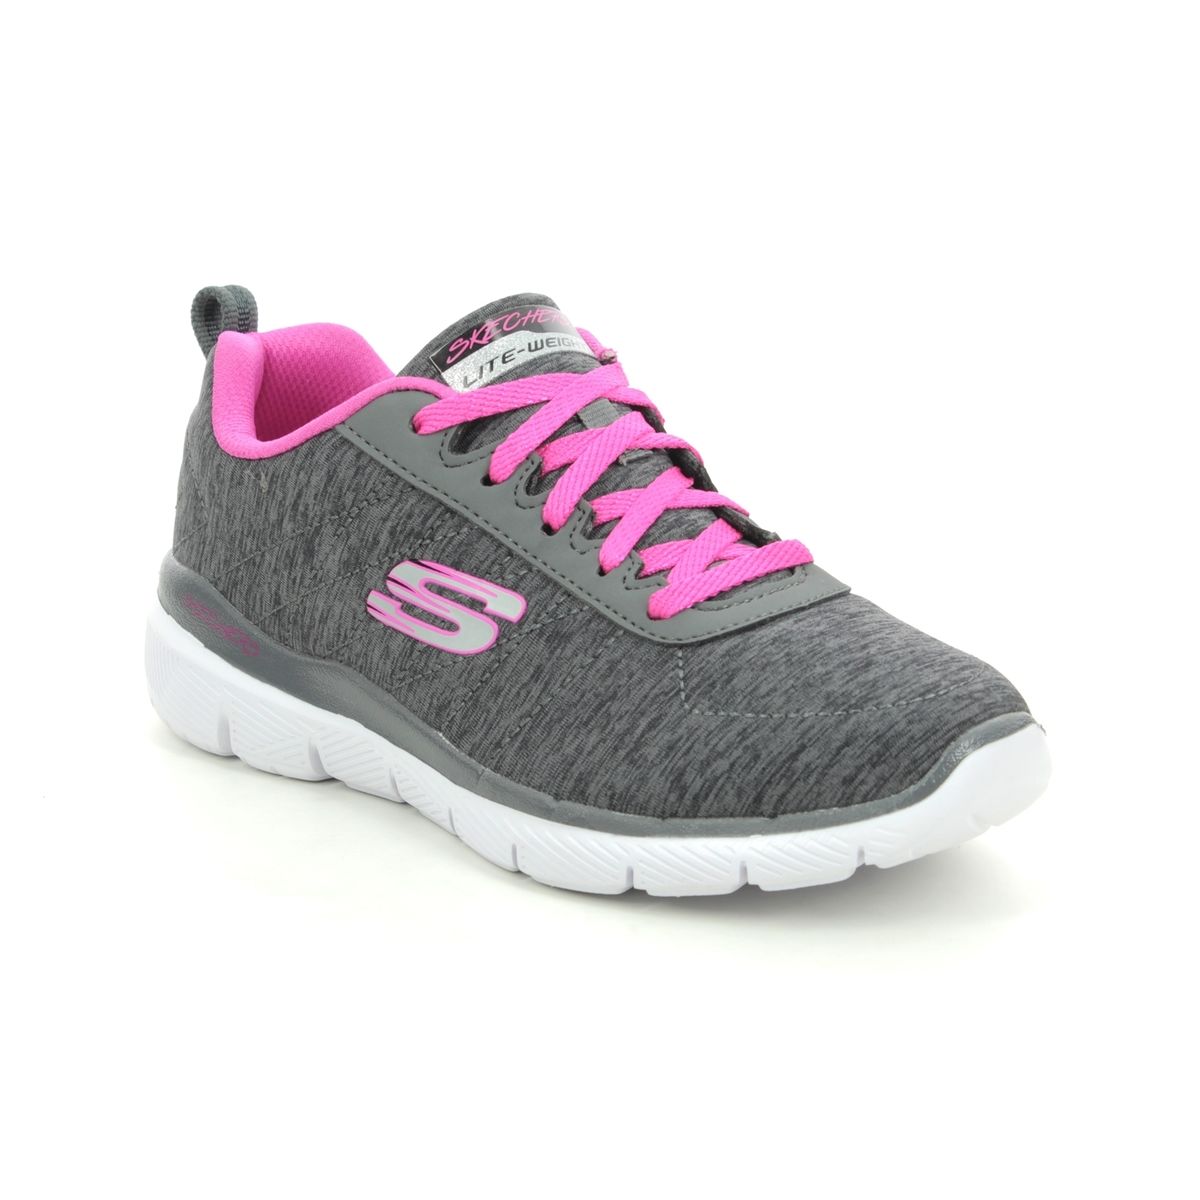 Skechers Skech Appeal 3 BKHP Black hot pink Kids girls trainers 81631L in a Plain Man-made in Size 38